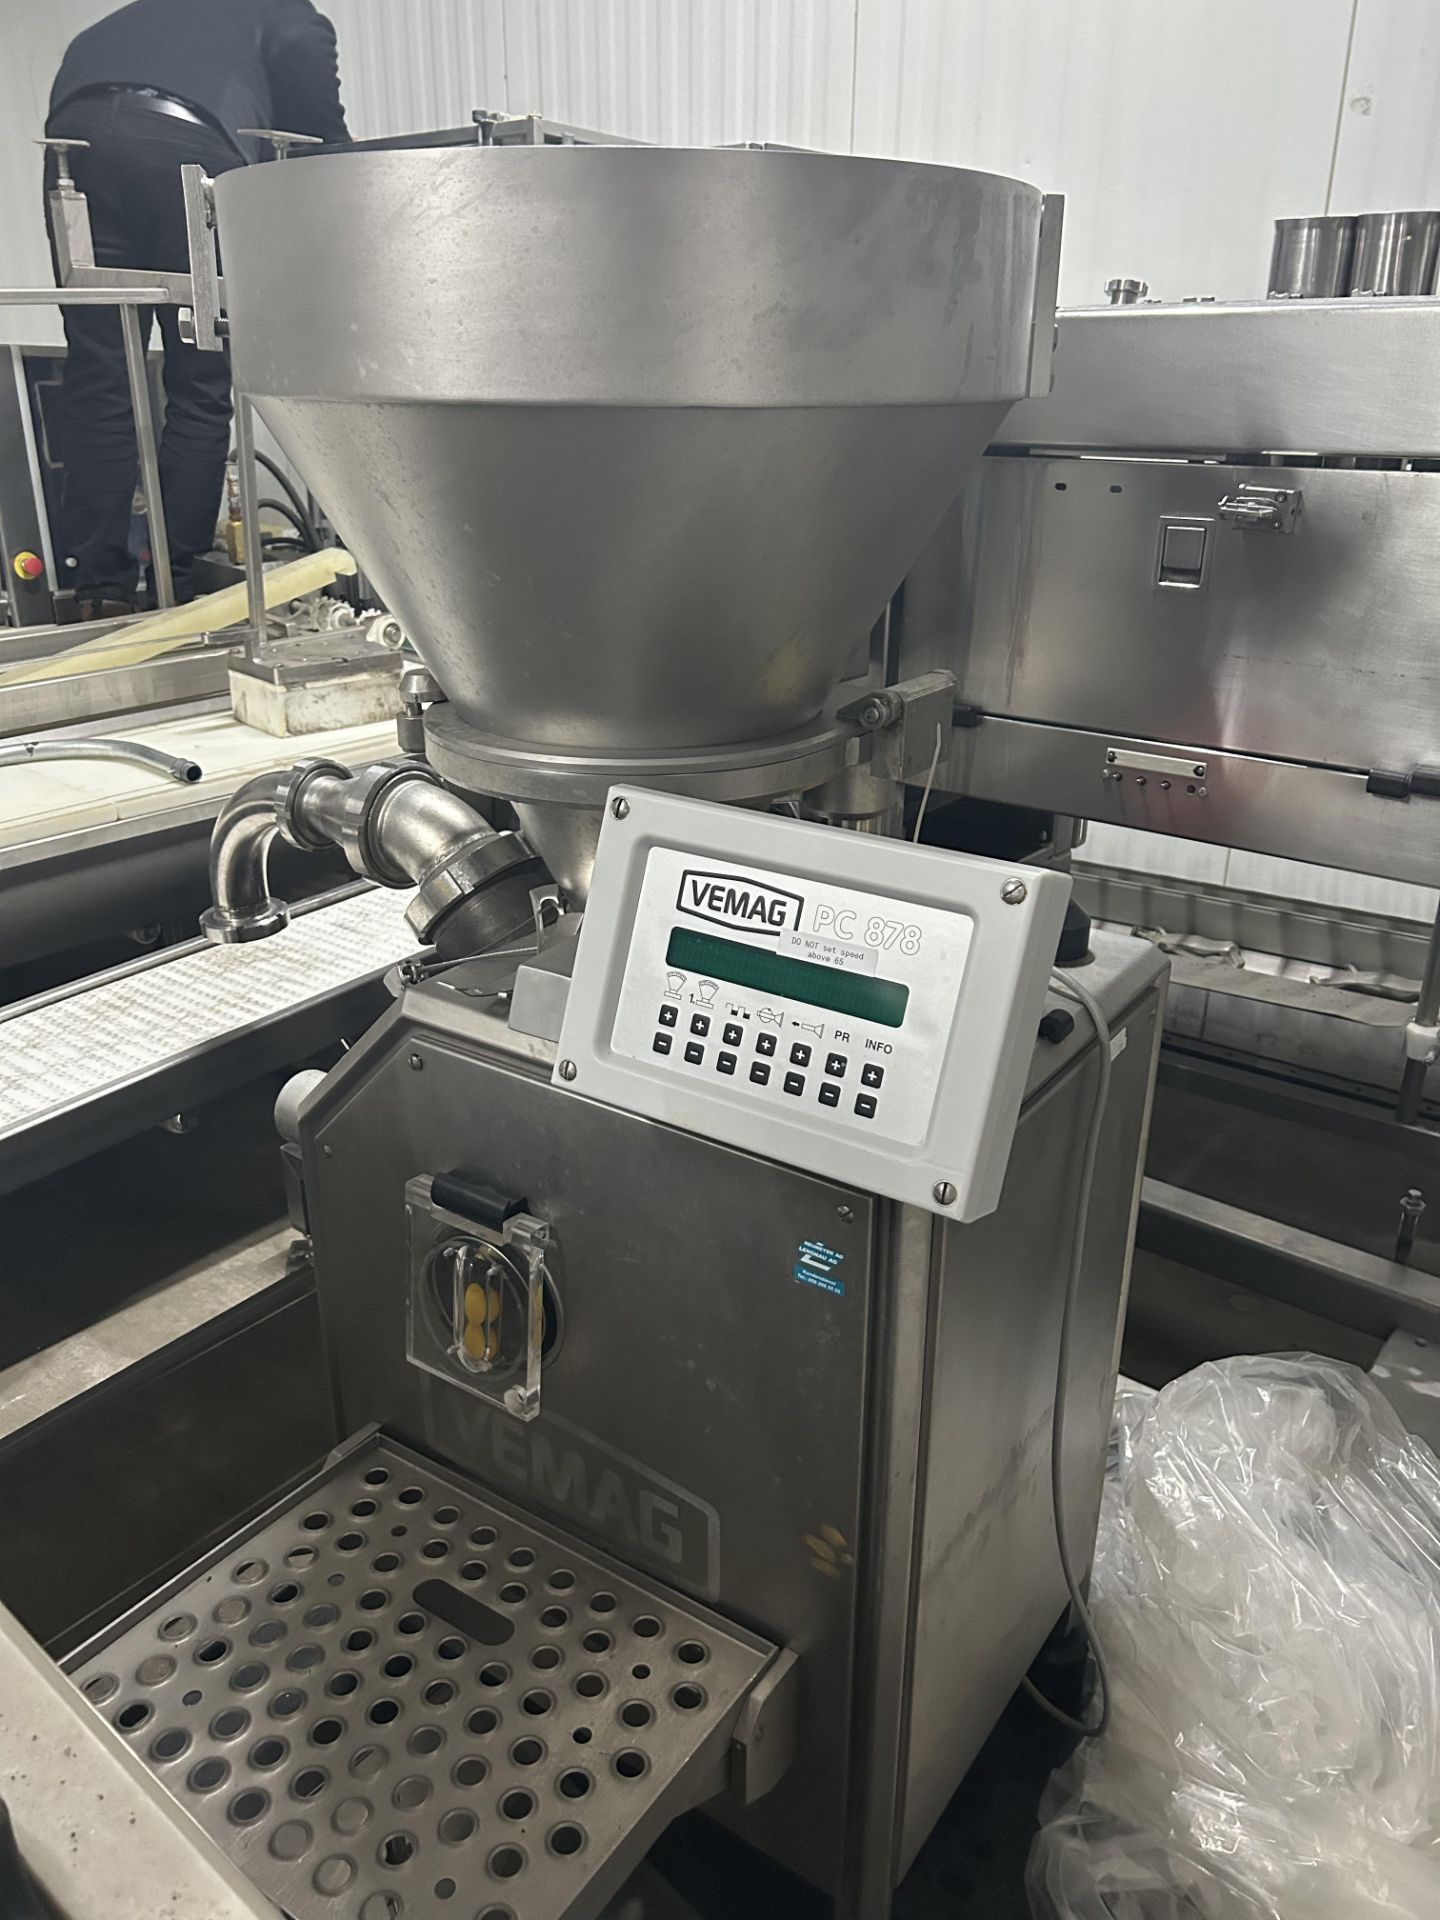 Lot Location: St. Louis MO - Vemag Robot 500 Extruder/Stuffer, DOM 2016, S/N #1285033